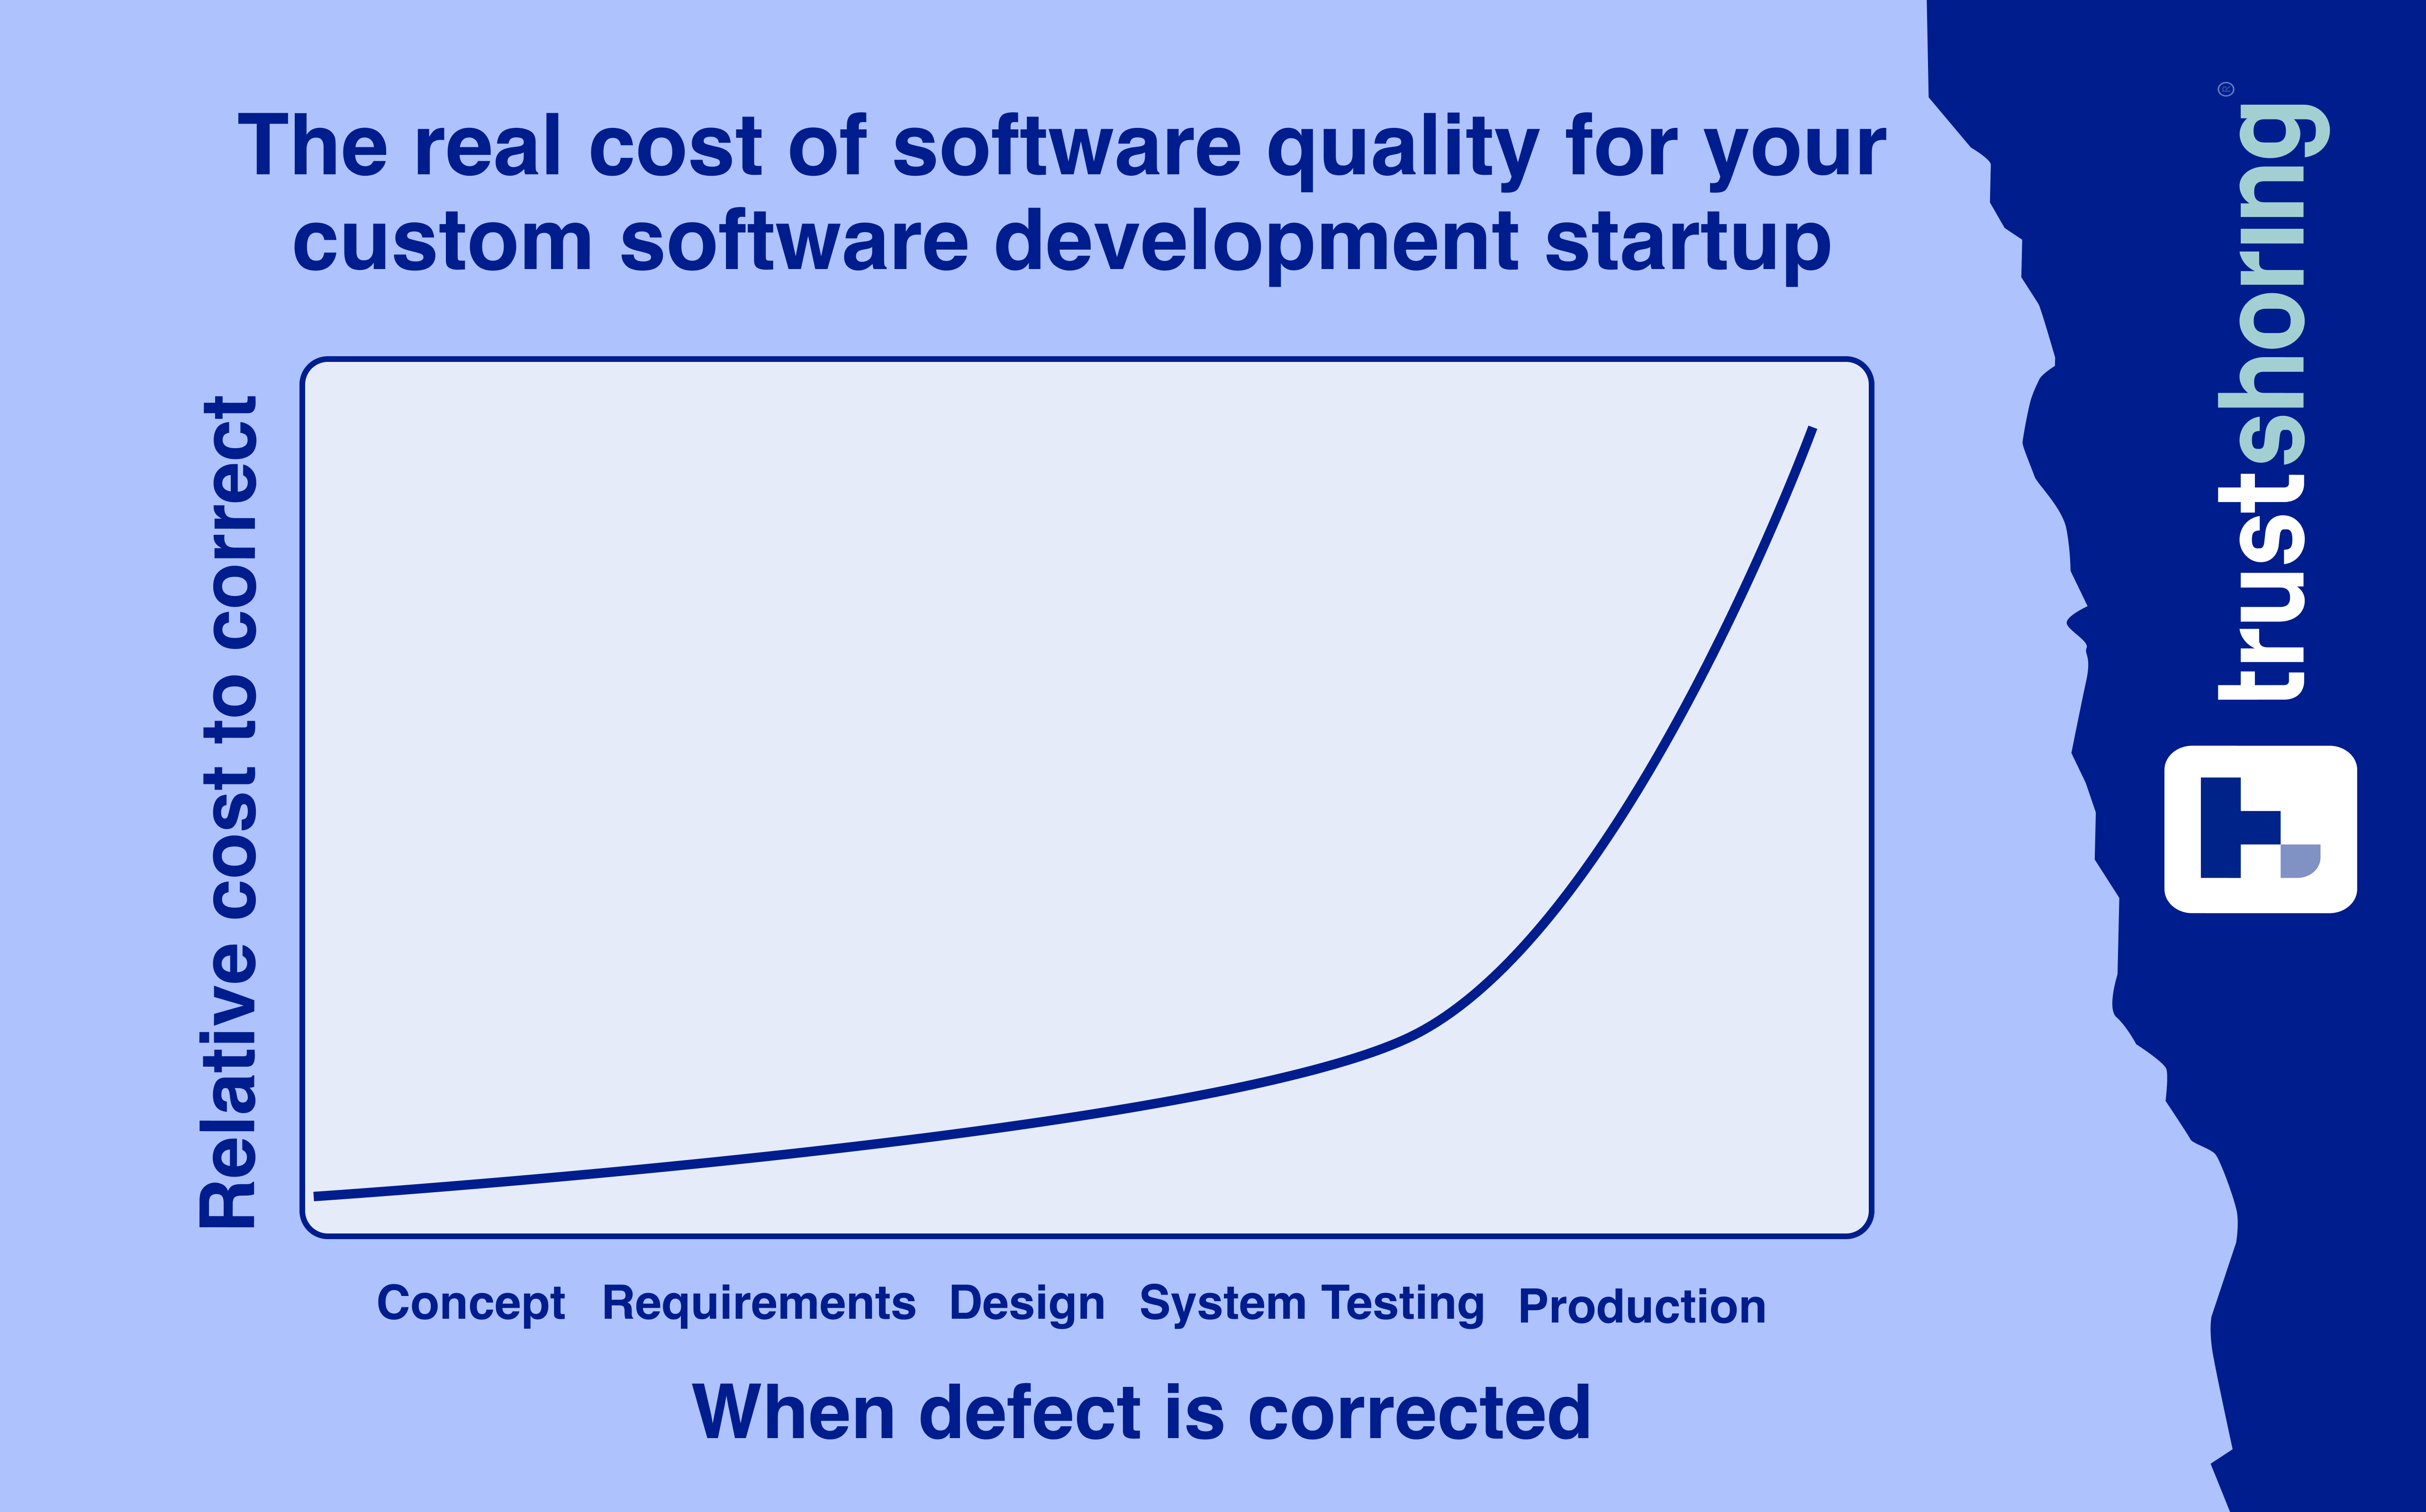 The real cost of software quality for your custom software development startup